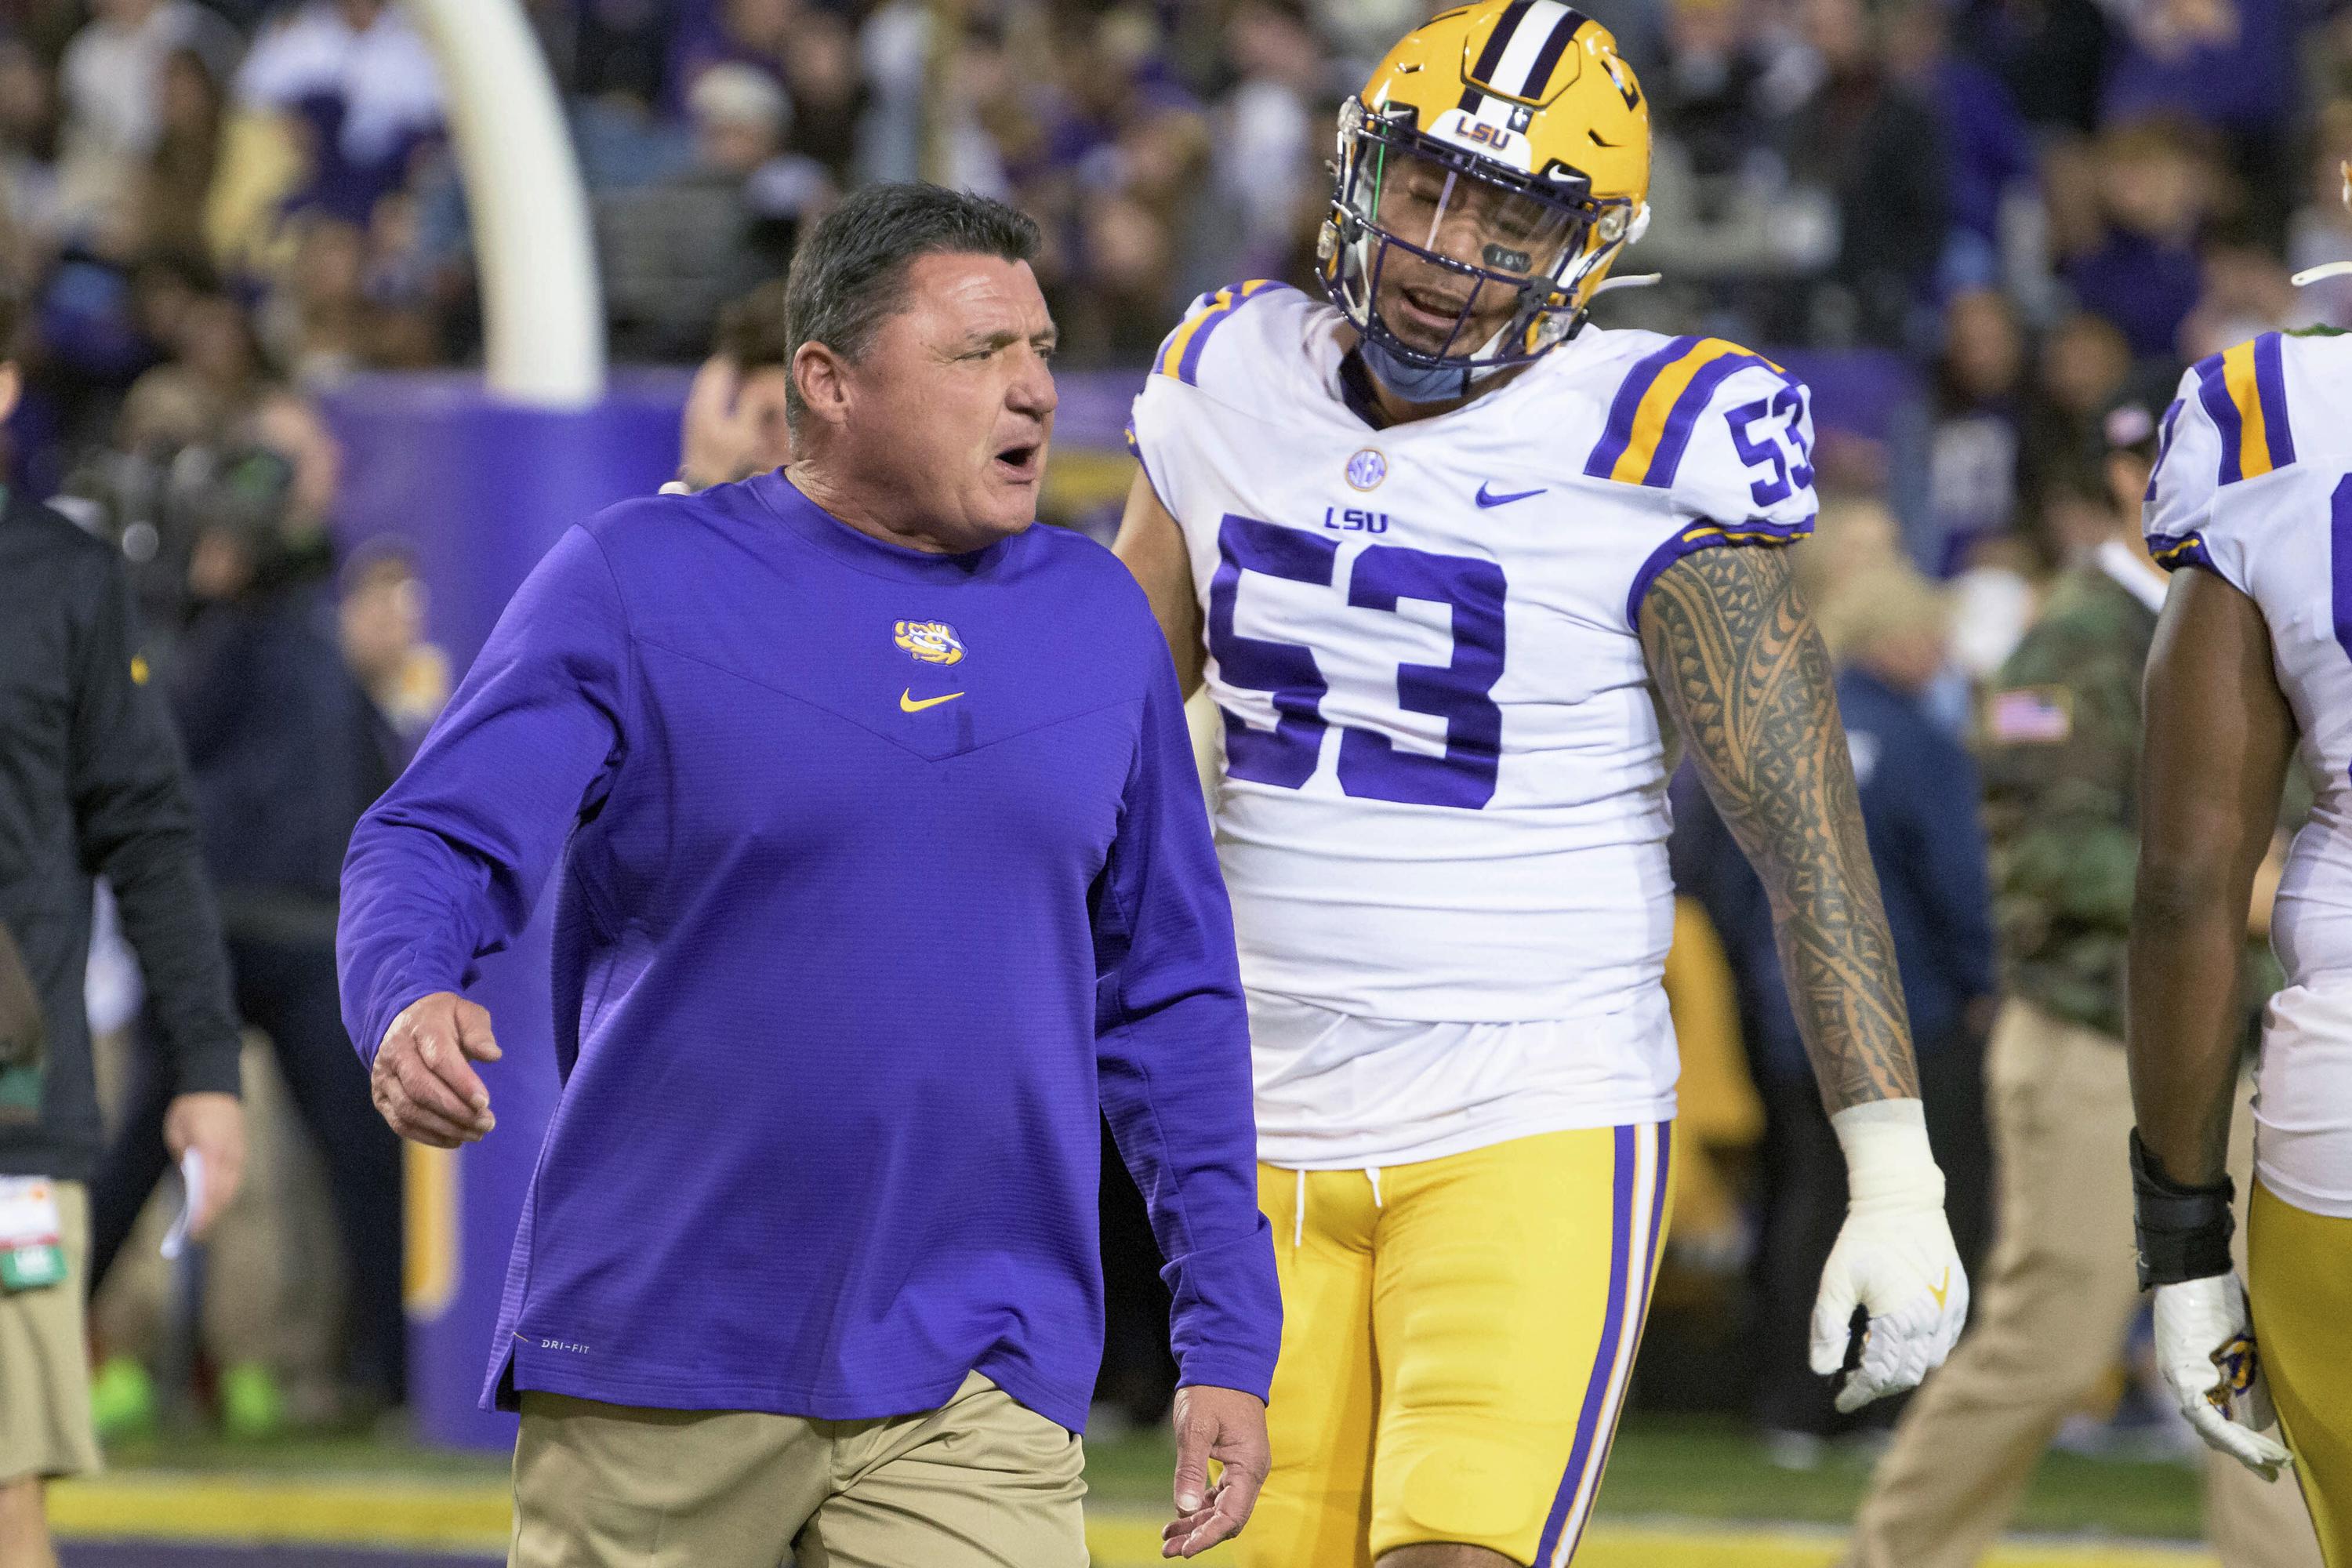 LSU hosts ULM with bowl eligibility at stake for both teams AP News